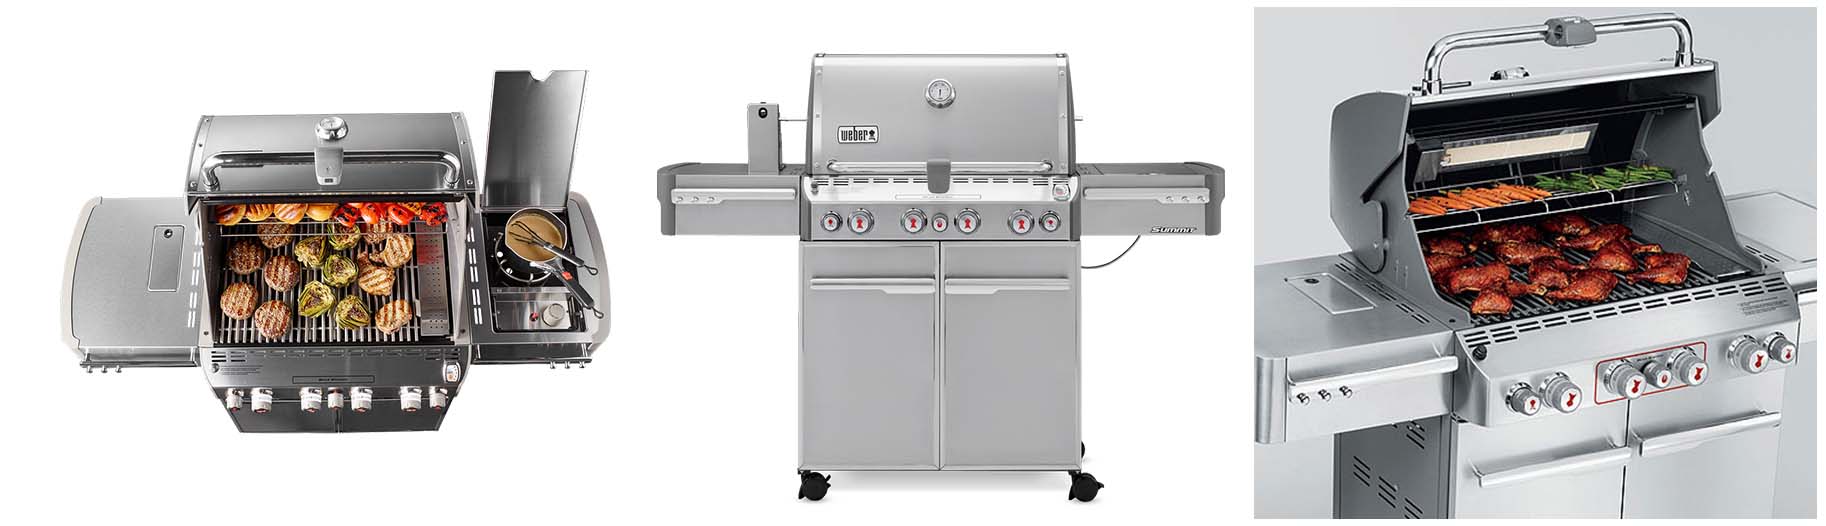 Weber Summit S-470 Gas Grill